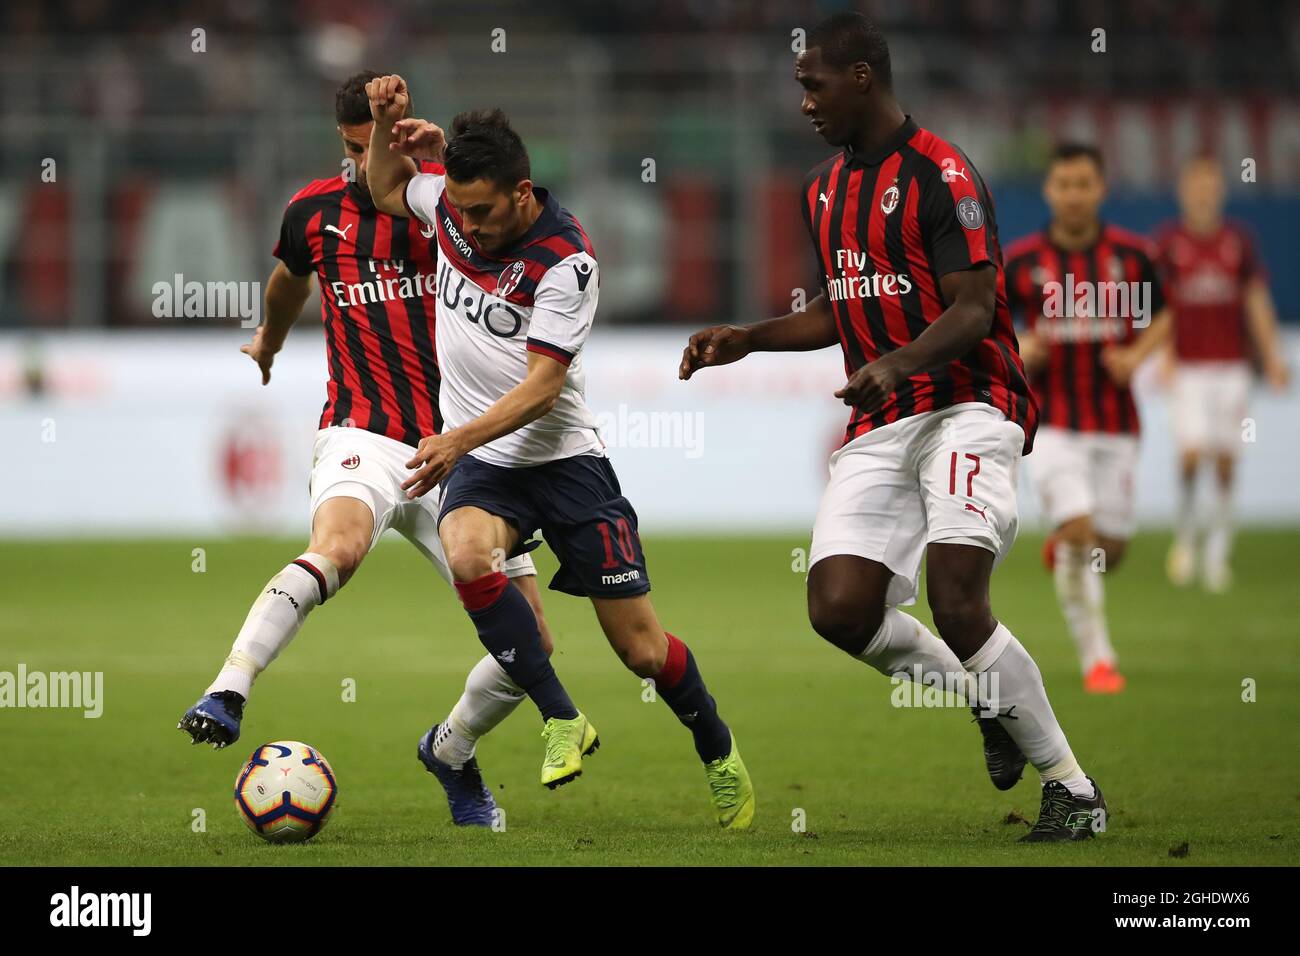 Nicola Sansone of Bologna is challenged by Mateo Musacchio of AC Milan as Cristian Zapata provides support during the Serie A match at Giuseppe Meazza, Milan. Picture date: 6th May 2019. Picture credit should read: Jonathan Moscrop/Sportimage via PA Images Stock Photo